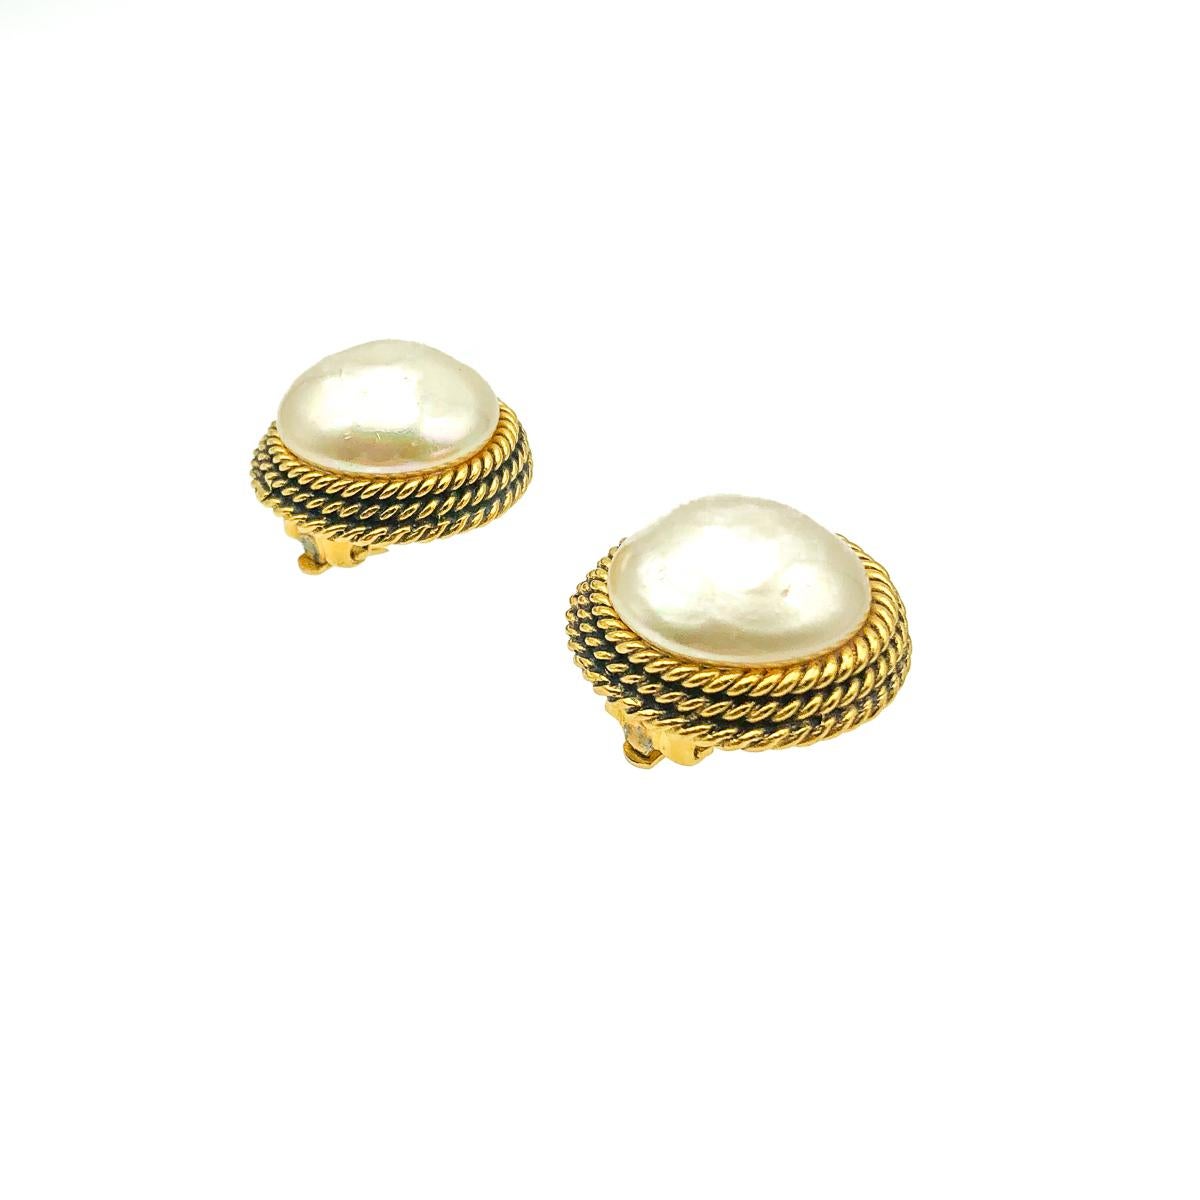 A divine pair of forever in style, totally classic, Vintage Chanel Pearl Earrings from 1984. Crafted in gold plated metal and set with a large poured glass pearl. In very good vintage condition without damage or wear - incredible condition given